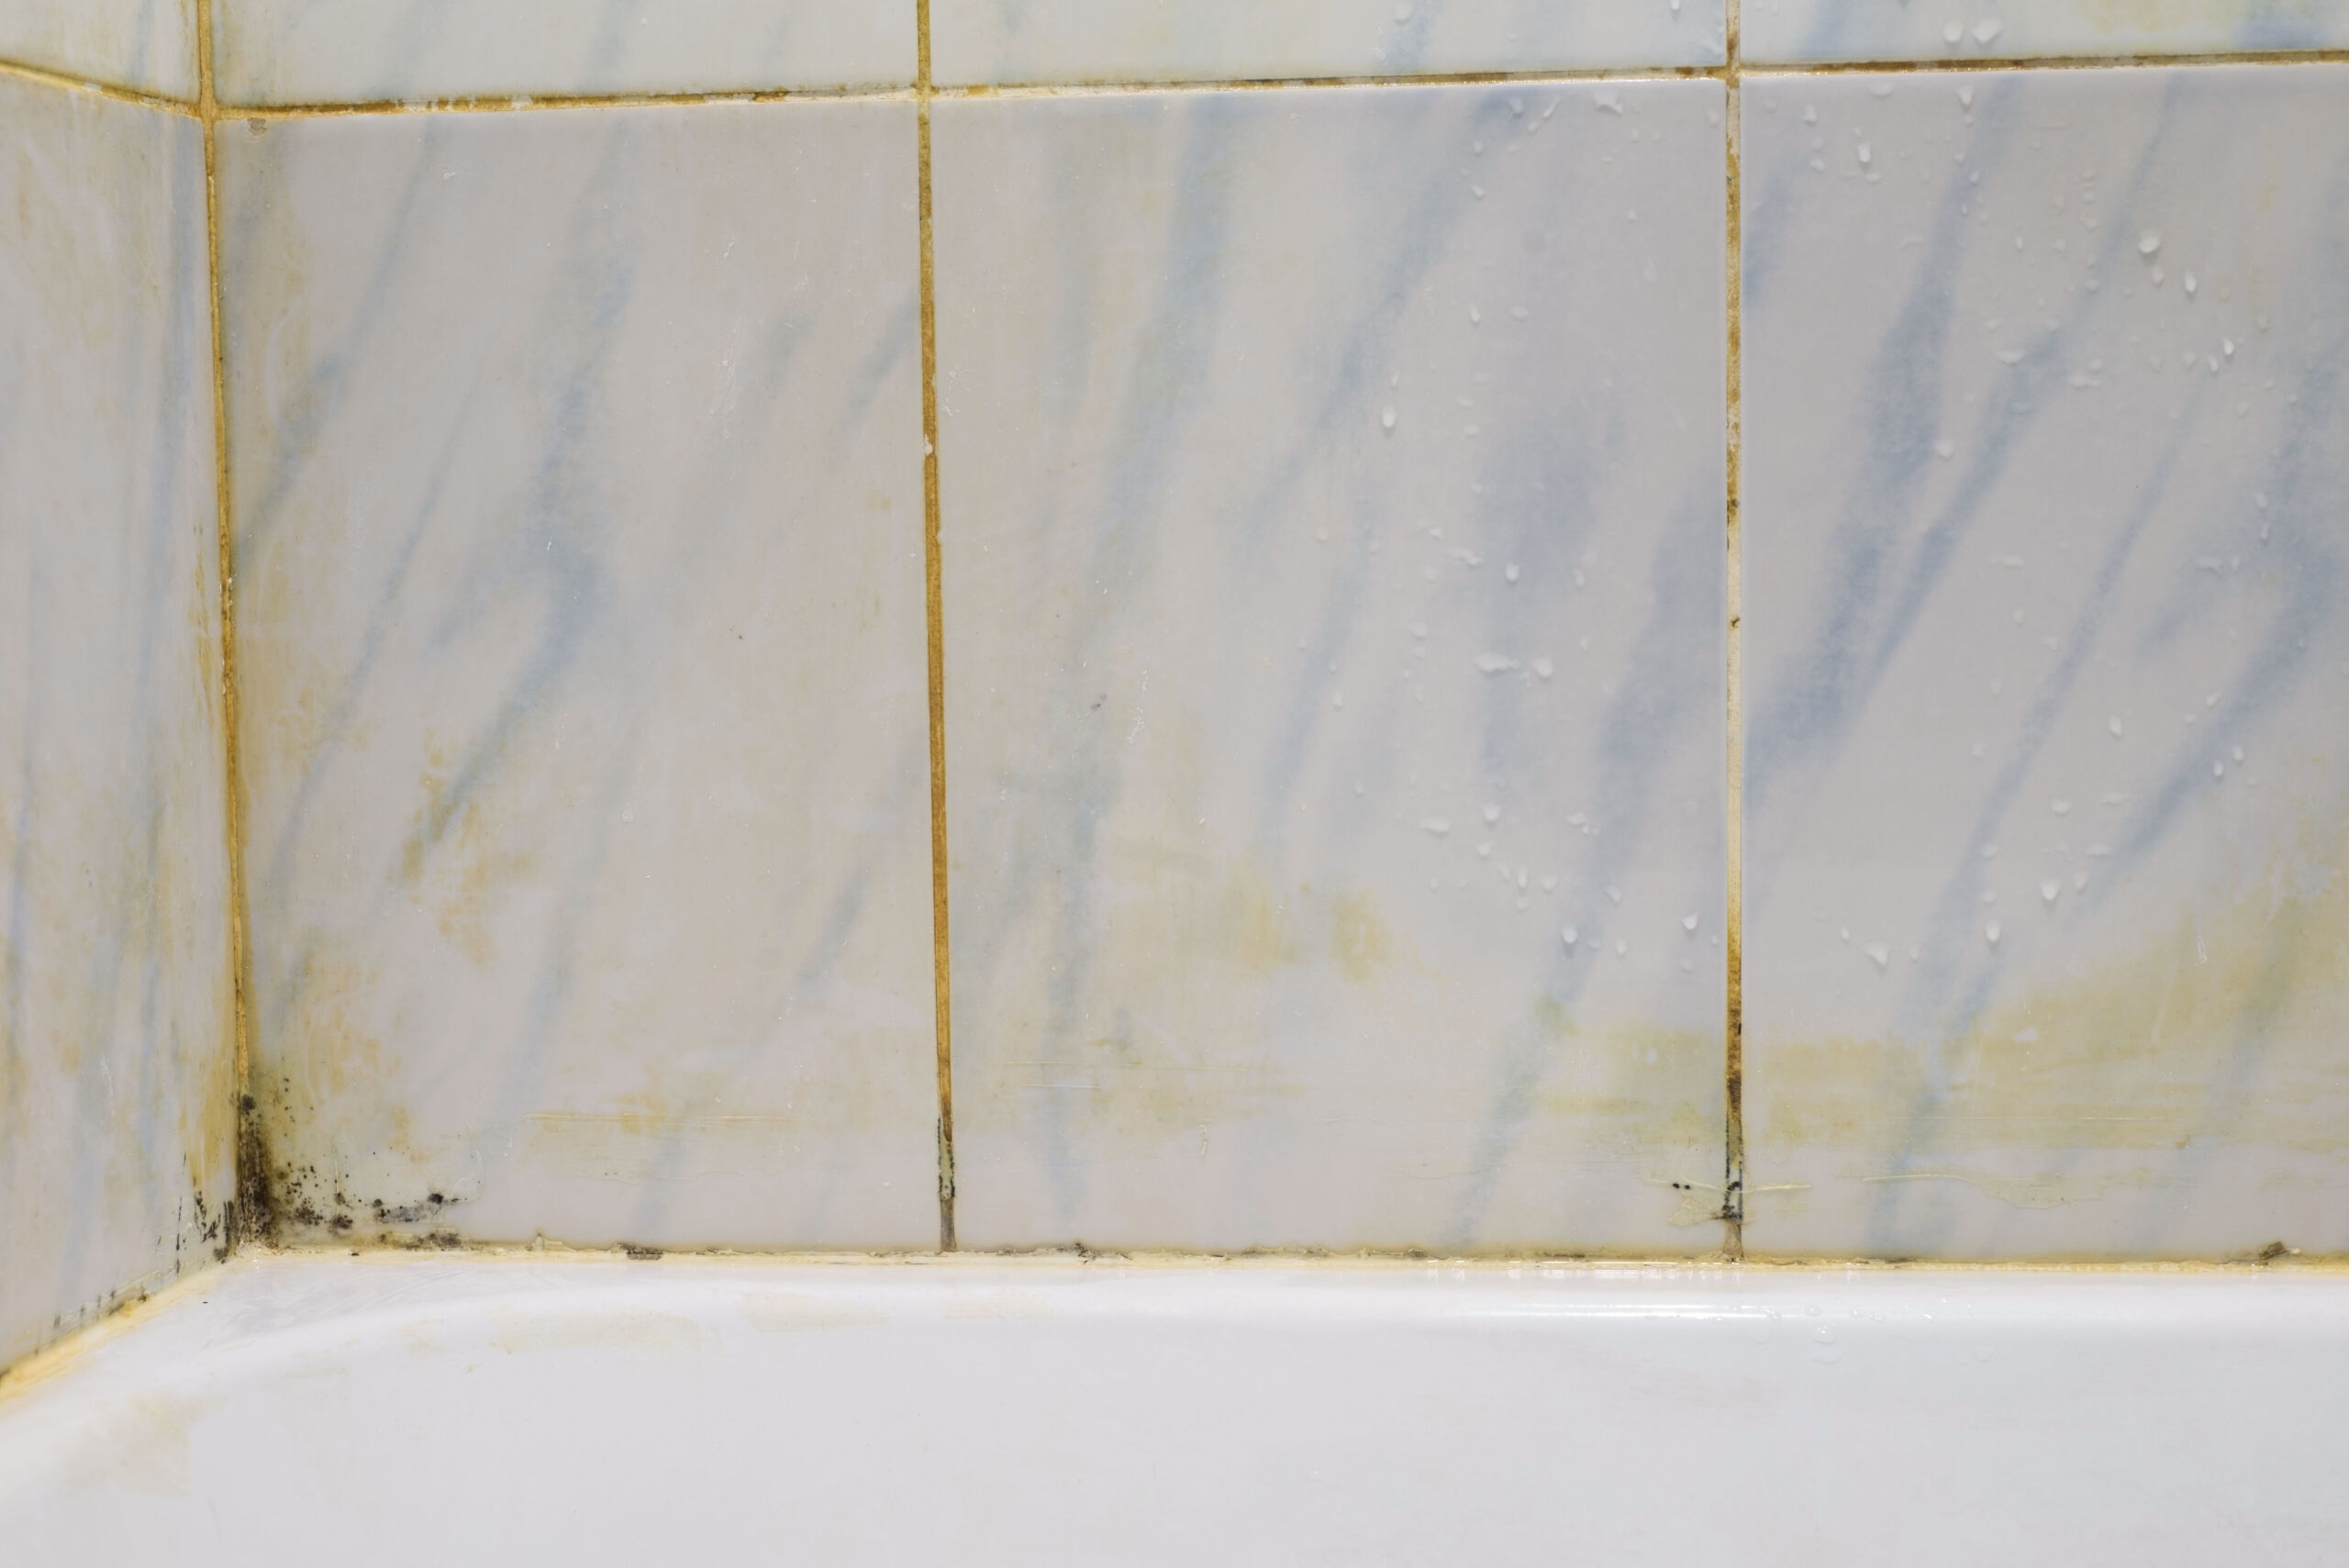 Grout sealing prevents mold and mildew